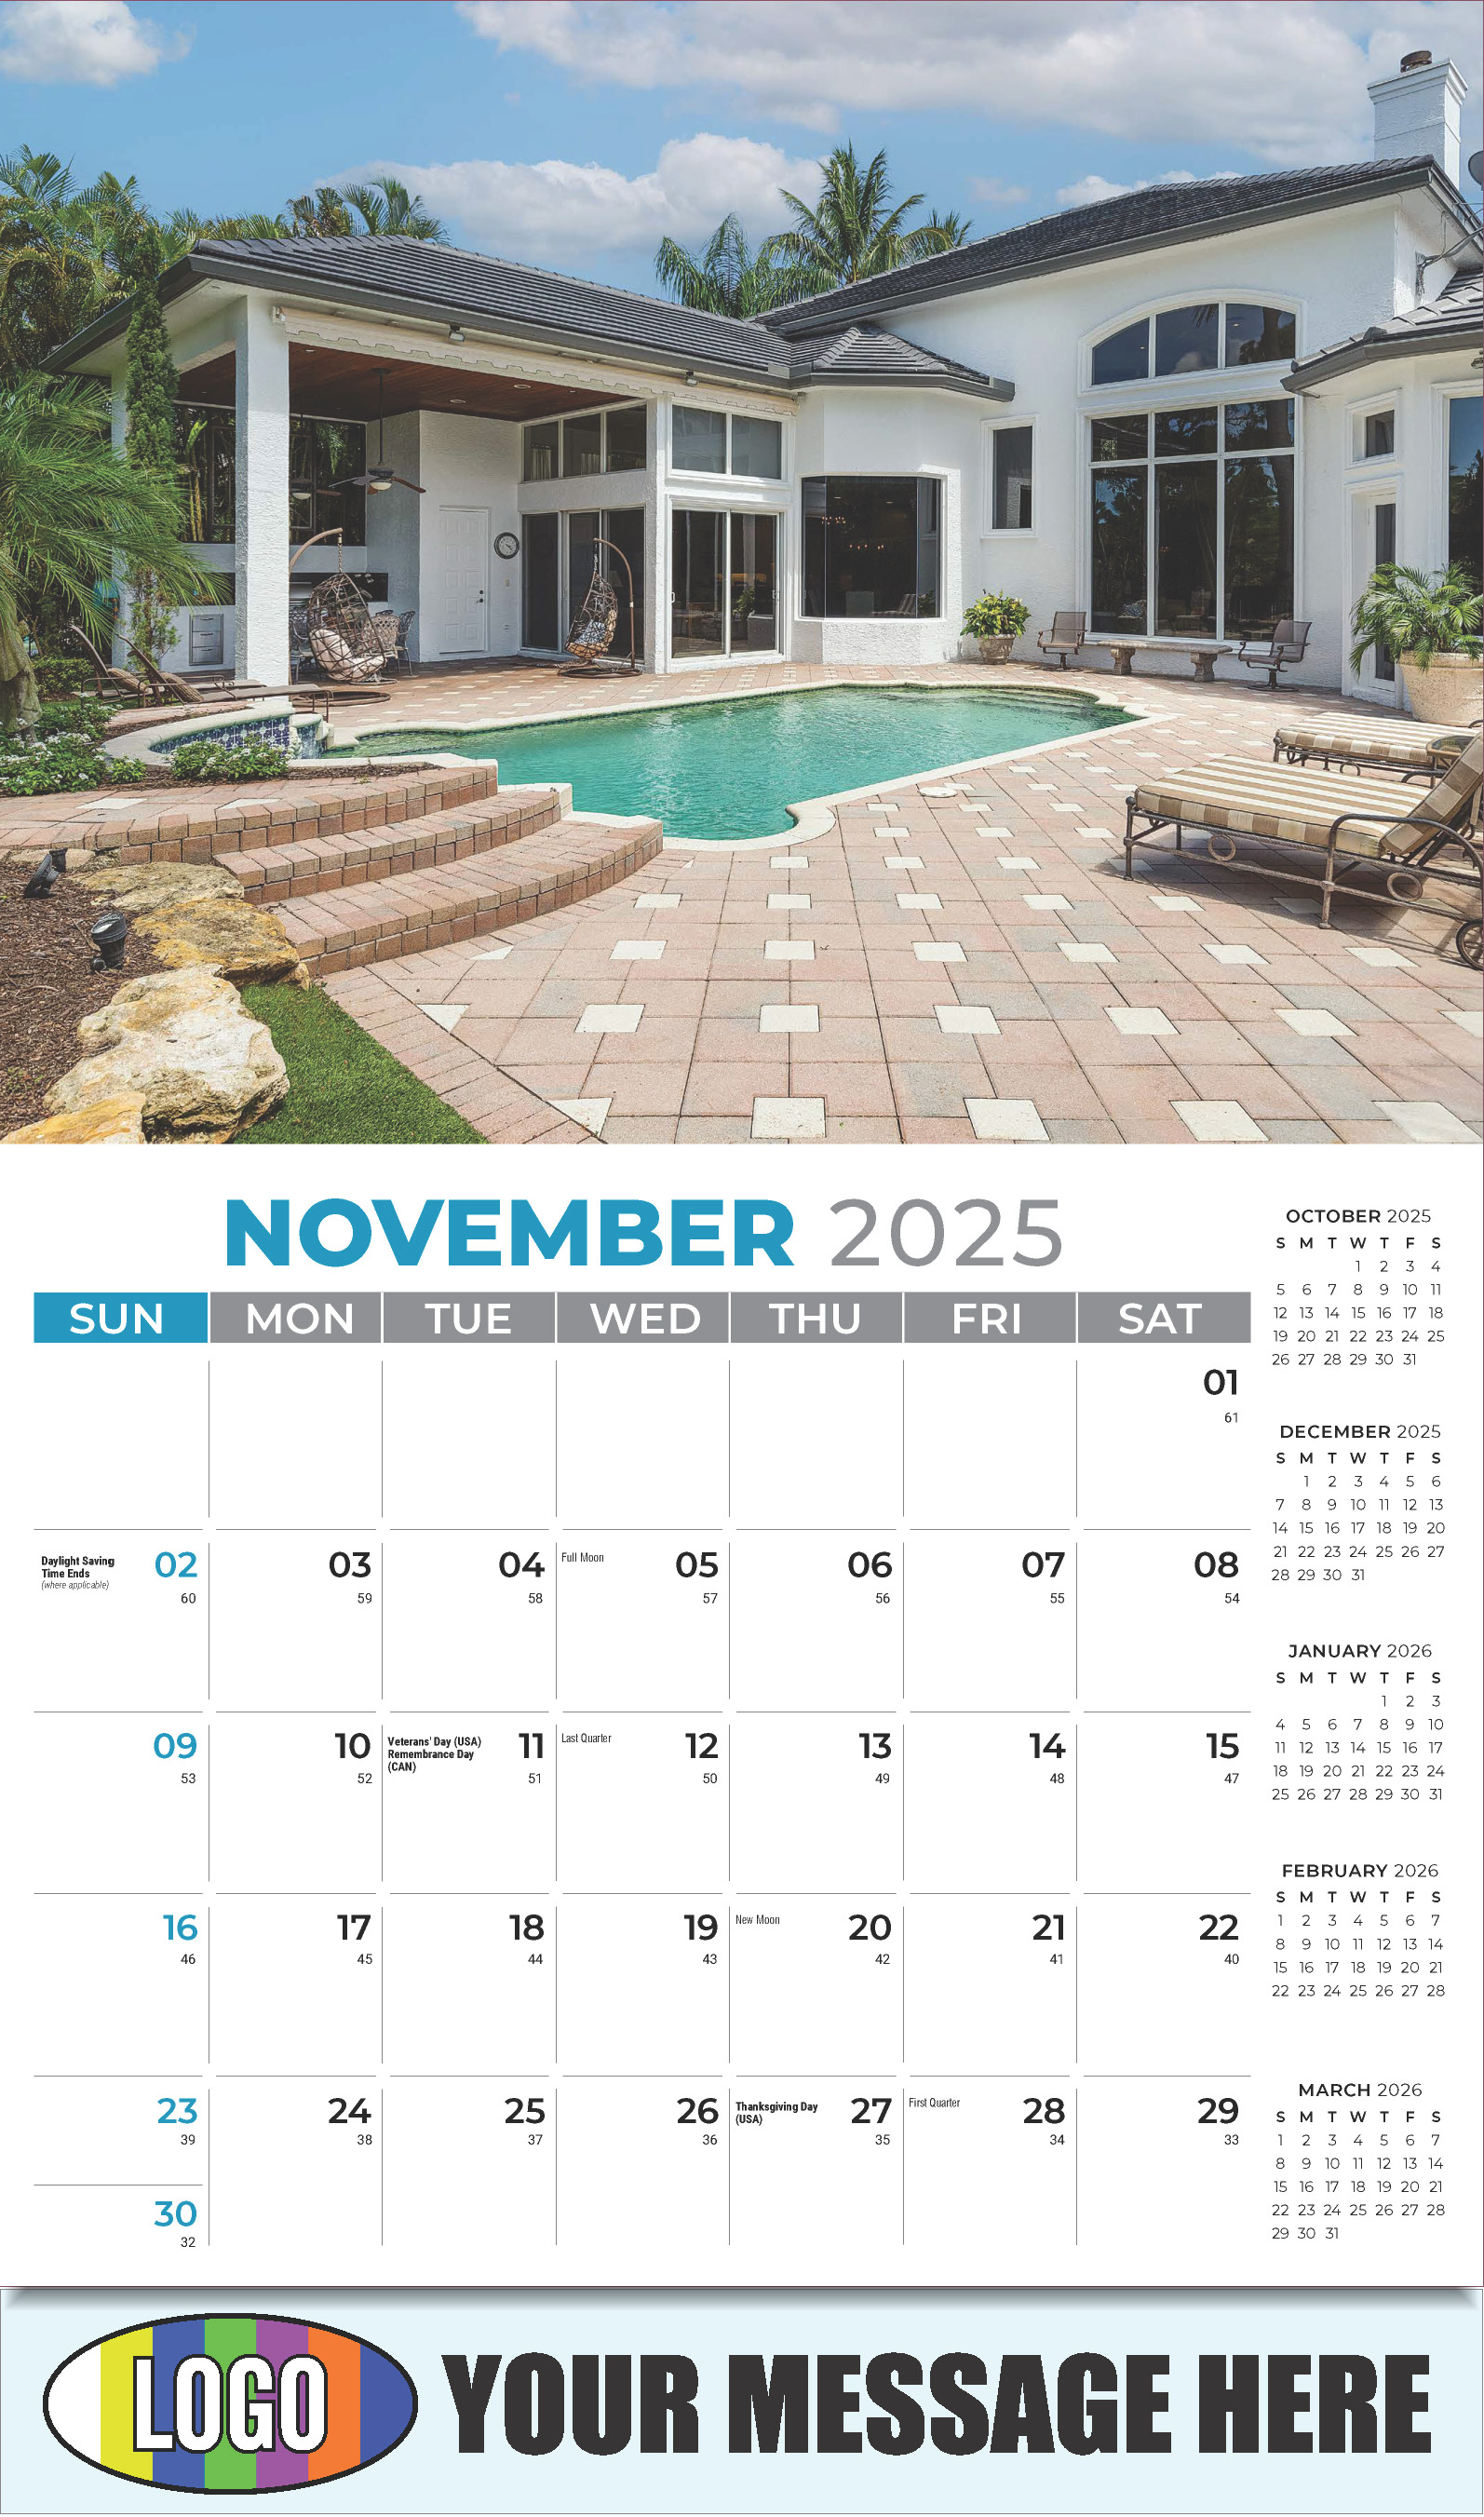 Luxury Homes 2025 Real Estate Agent Promotional Wall Calendar - November